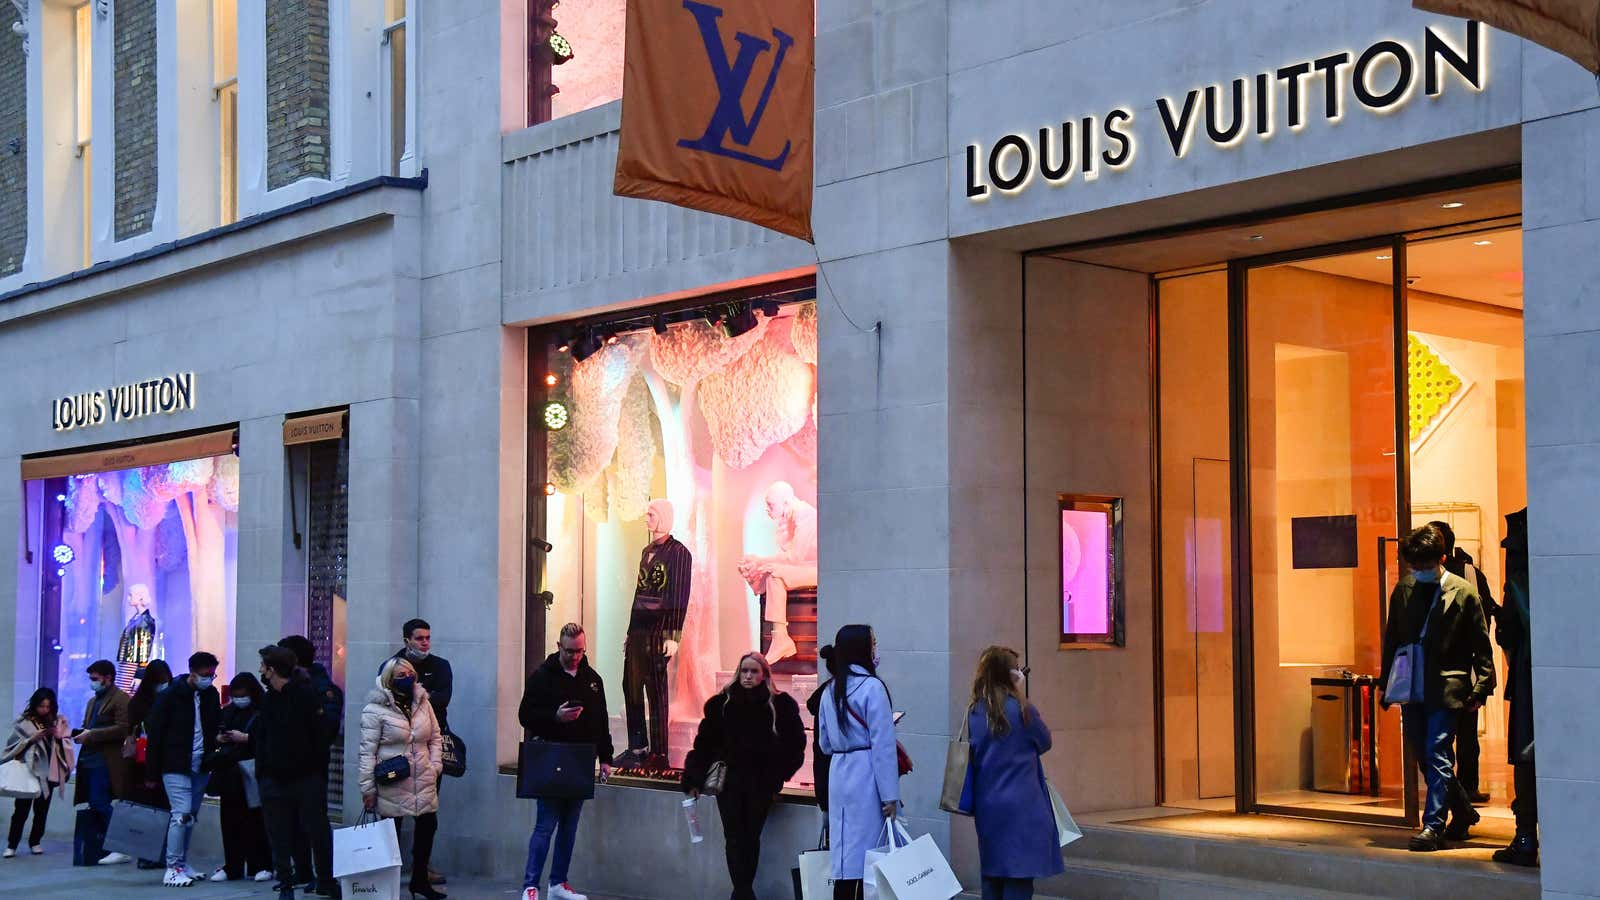 Even Covid-19 can’t keep shoppers away from Louis Vuitton.